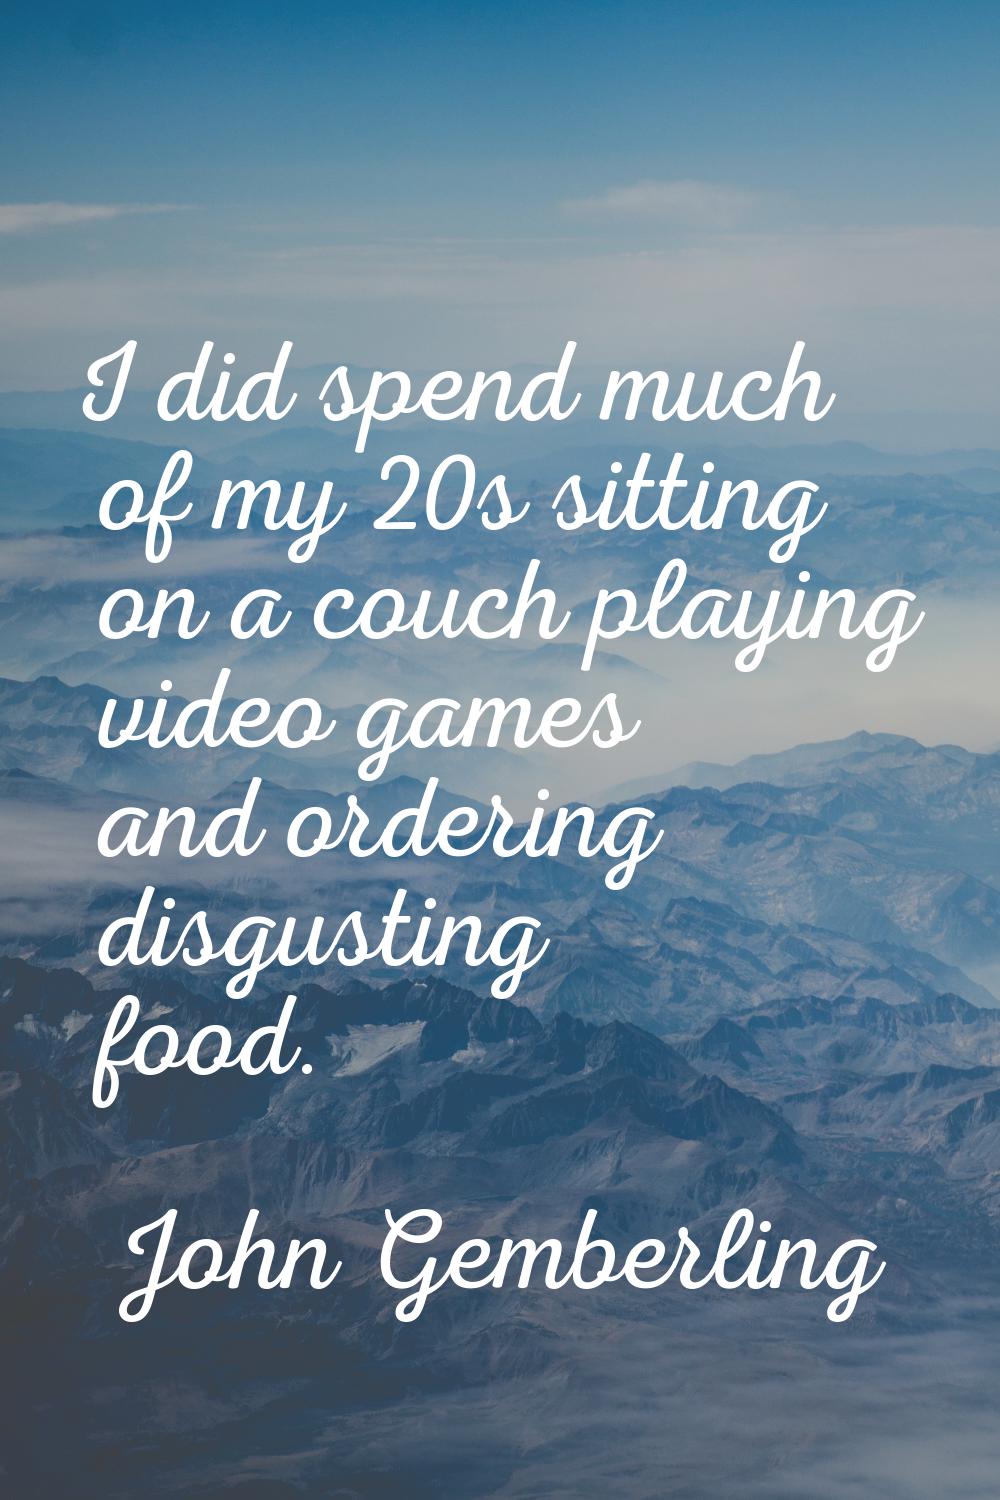 I did spend much of my 20s sitting on a couch playing video games and ordering disgusting food.